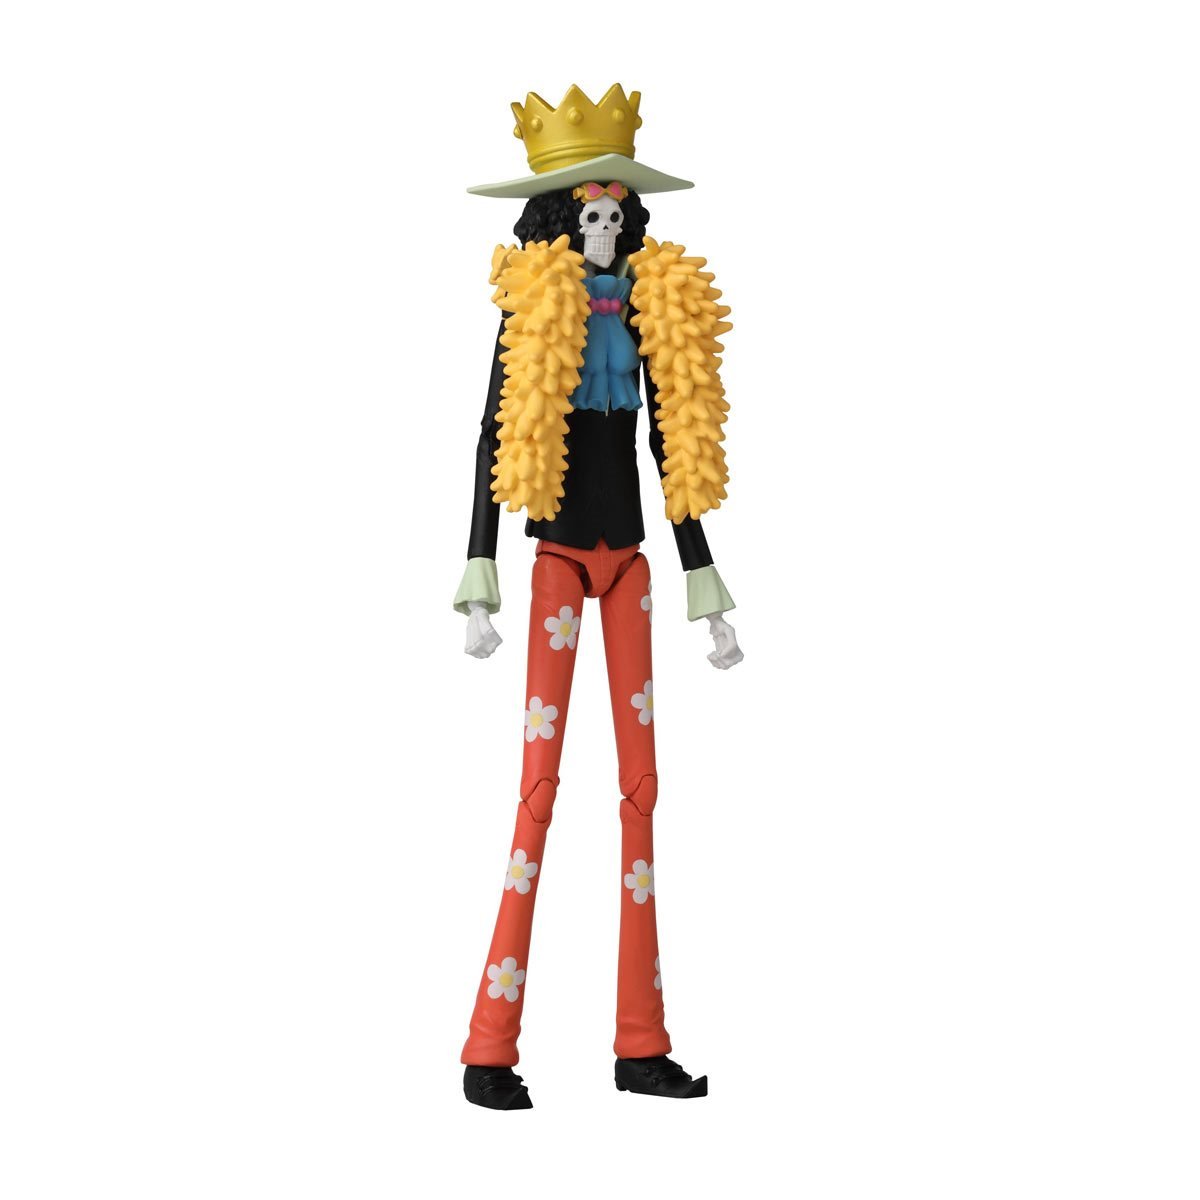 BANDAI NAMCO One Piece Anime Heroes Brook Action Figure